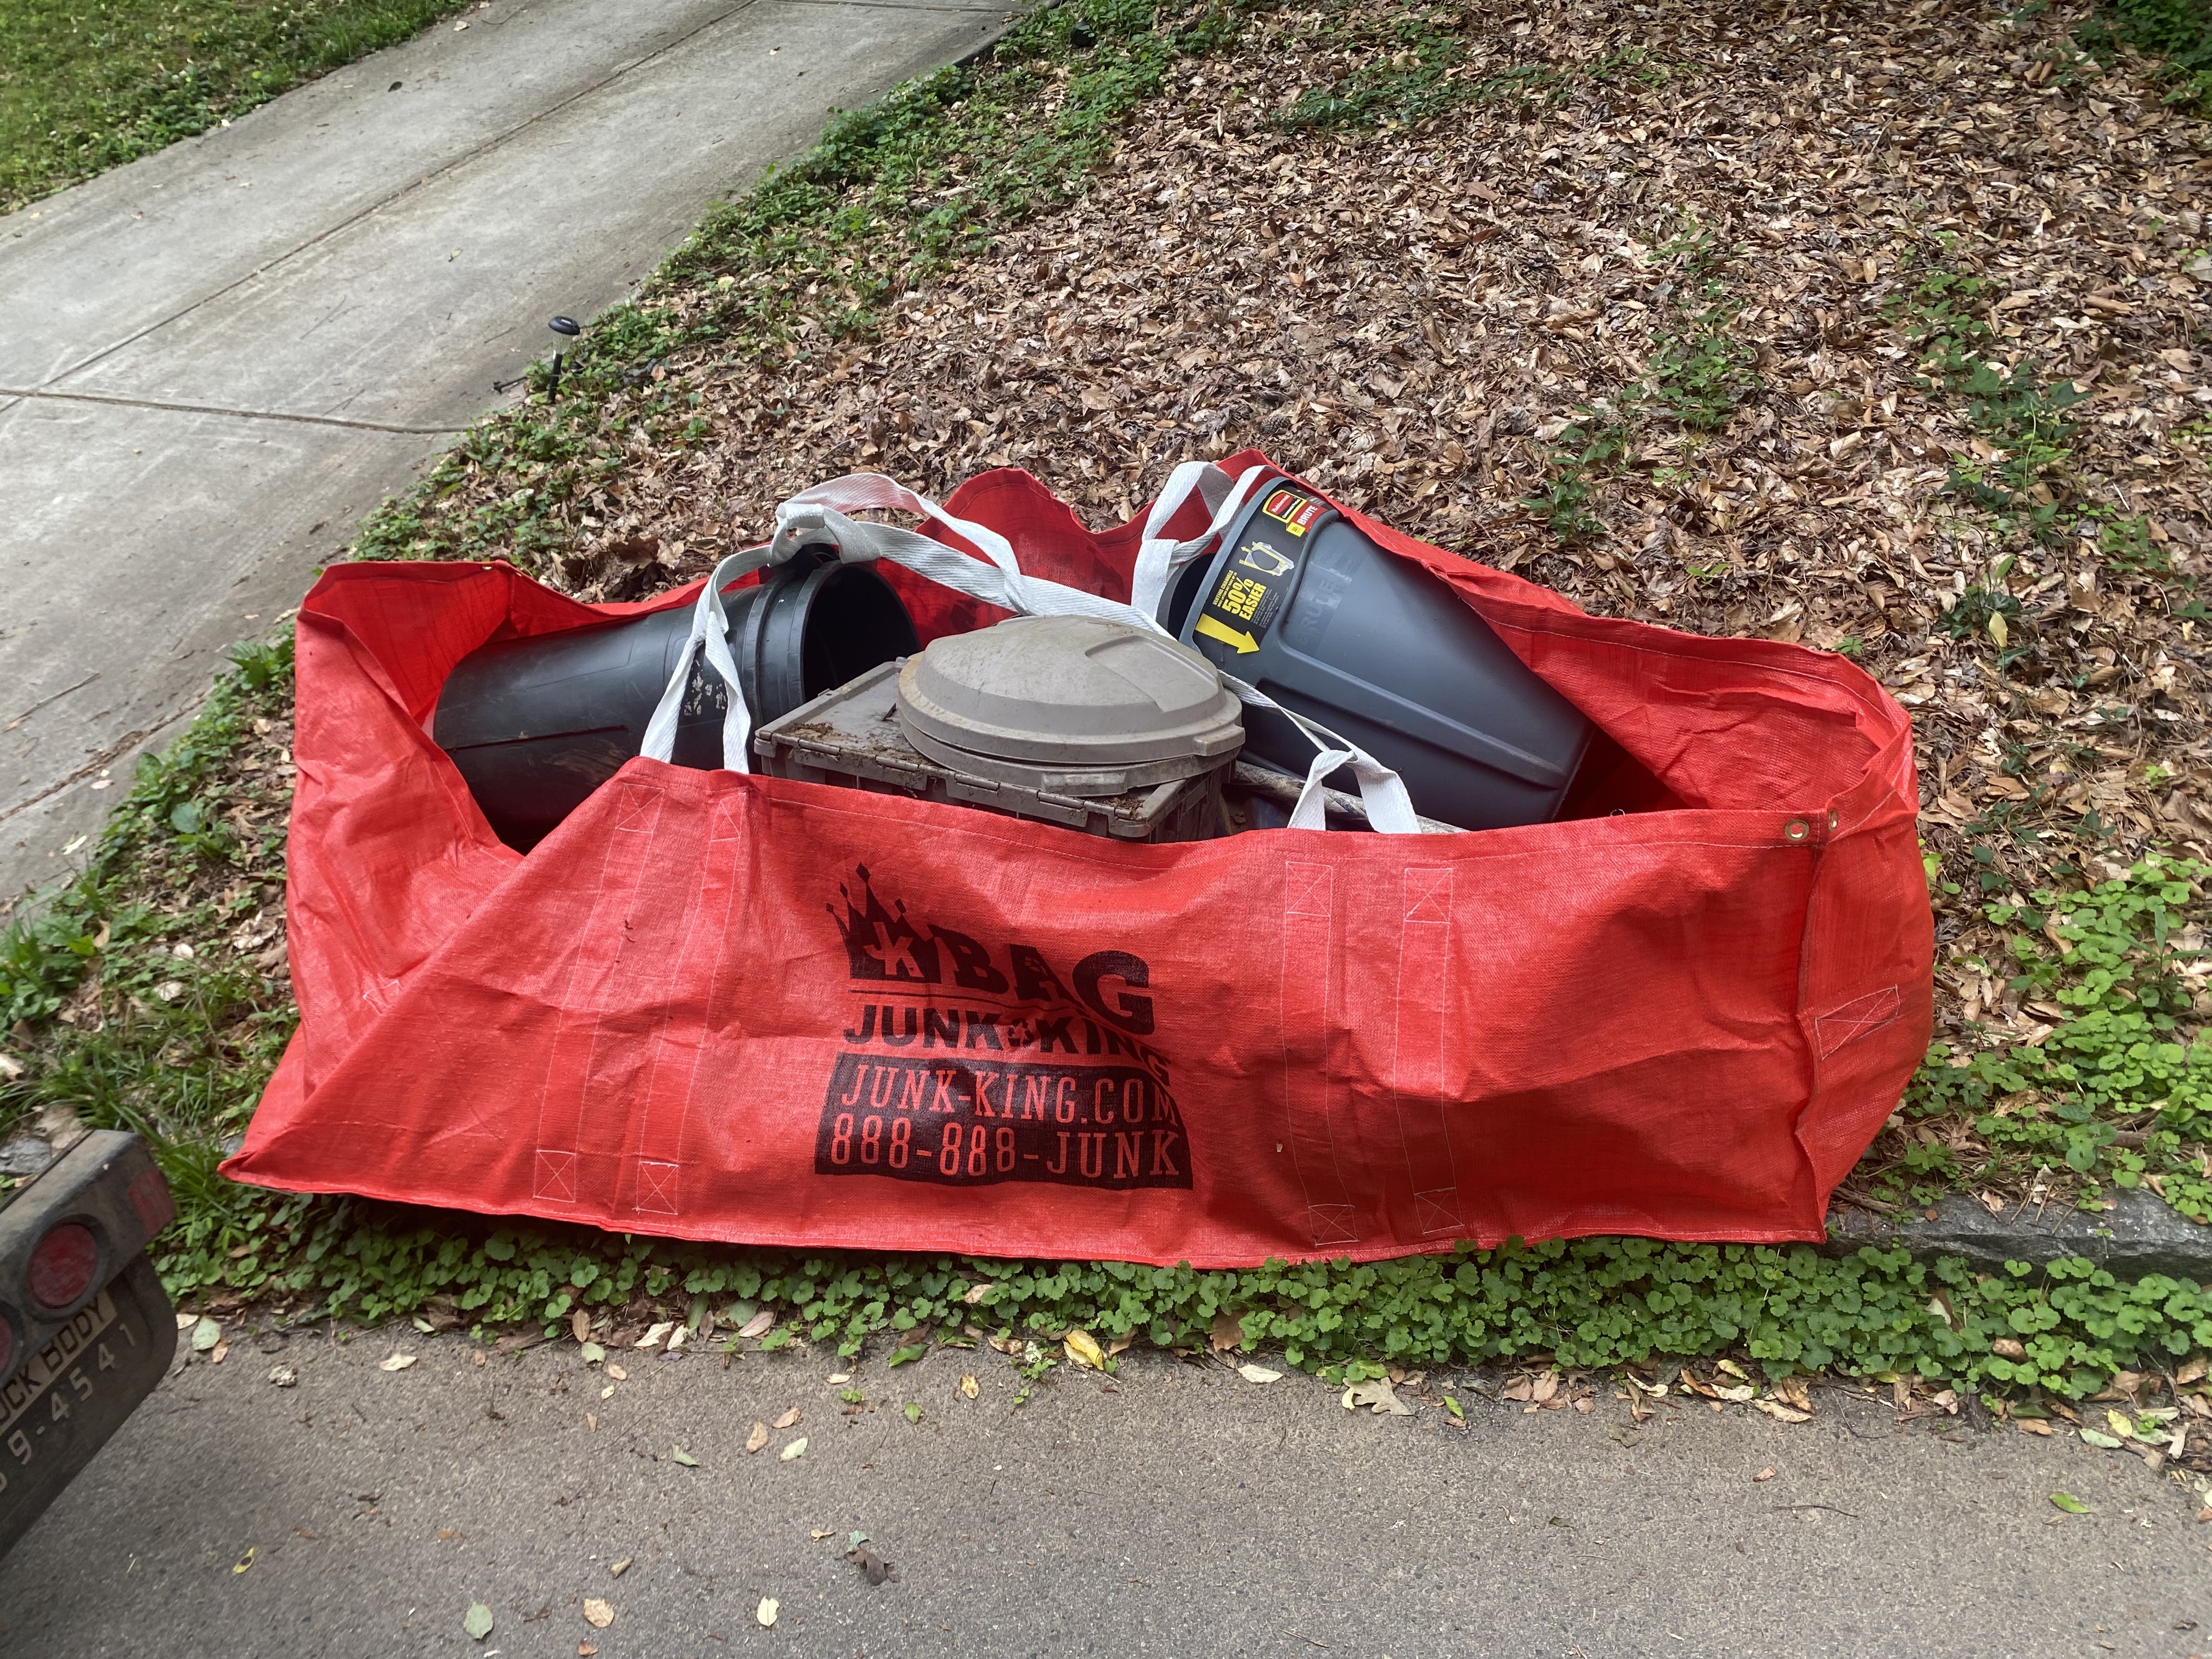 Dumpster Bag Rental: What You Need to Know Before Making a Decision